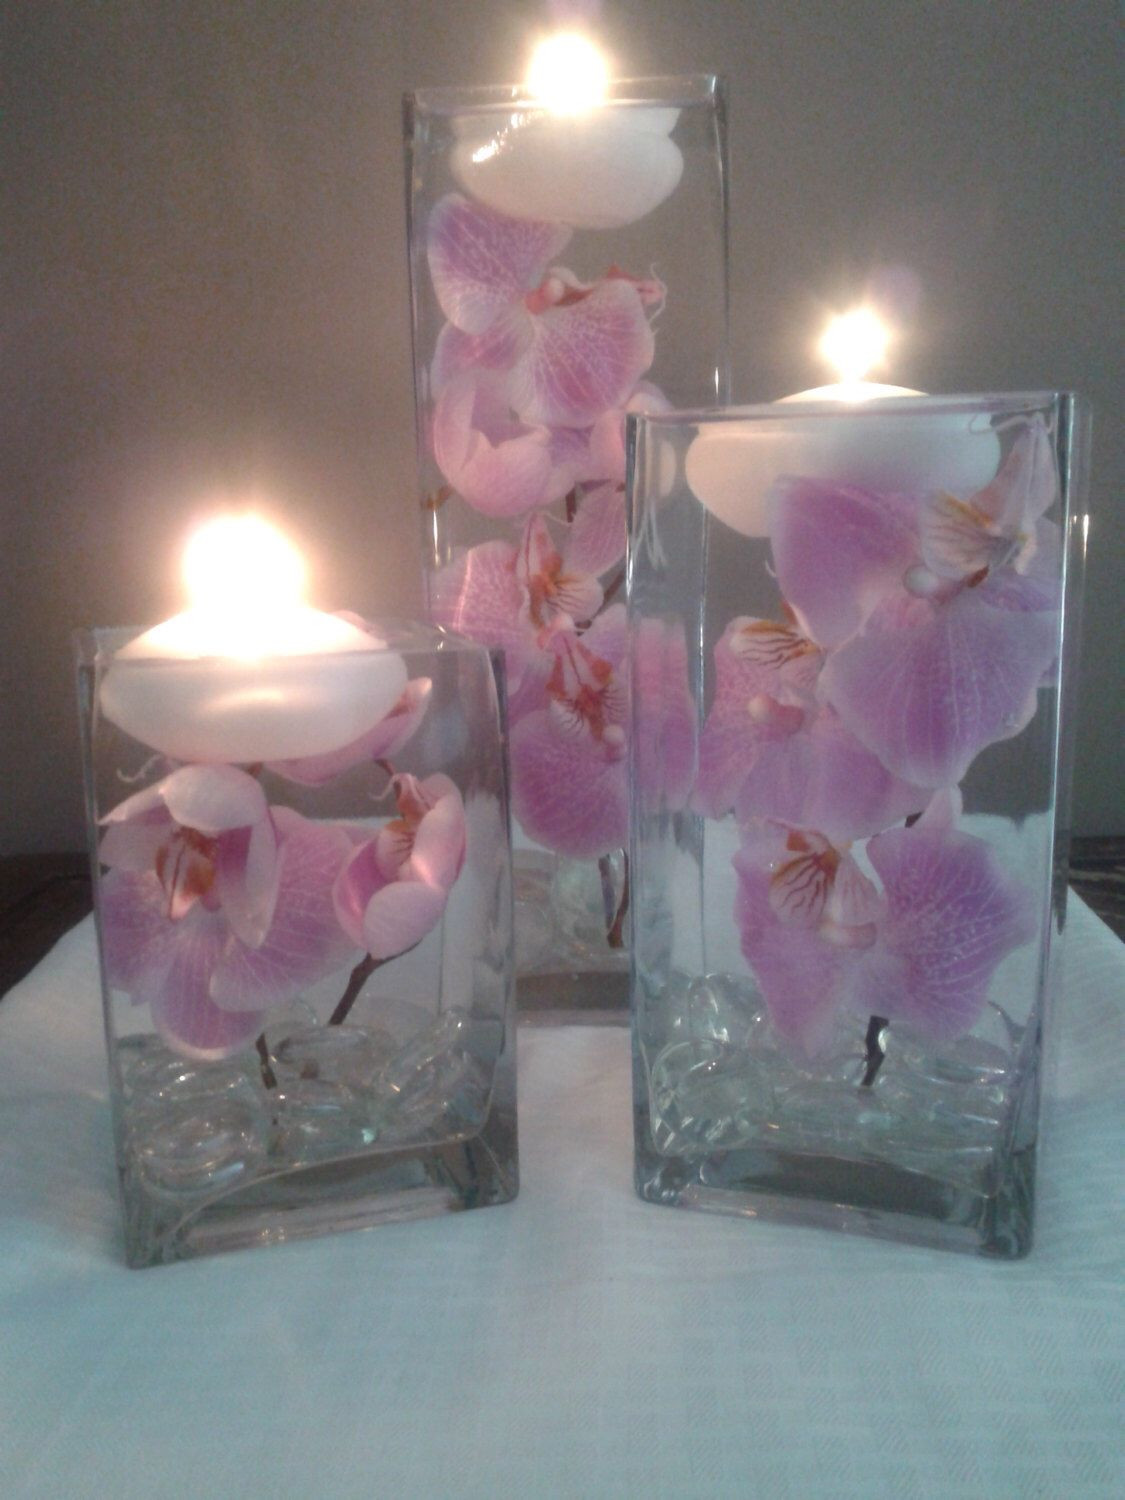 26 Cute Square Vases Set Of 3 2022 free download square vases set of 3 of a set of three square vases with purple orchids floating in water inside a set of three square vases with purple orchids floating in water perfect for unique wedding